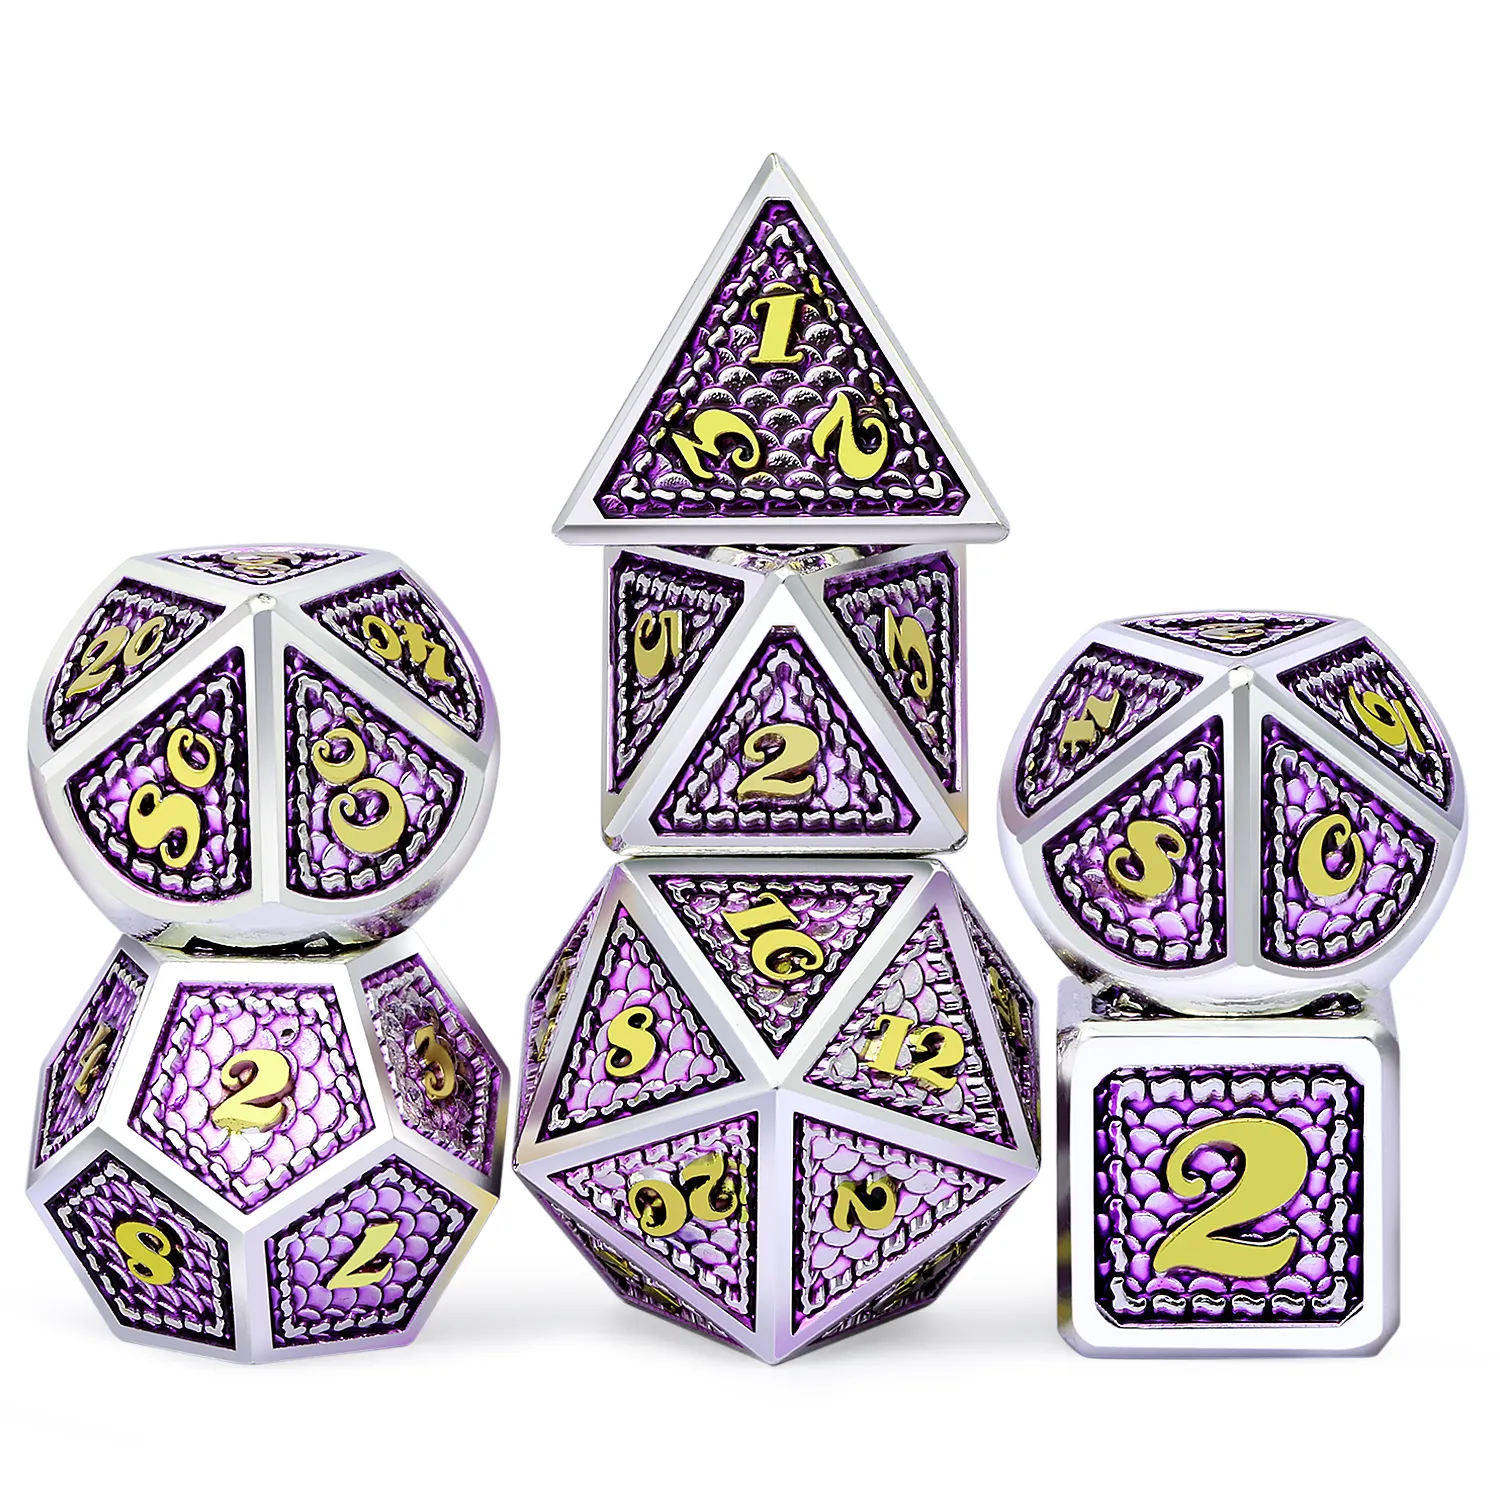 Best seller Metal DND Game Dice Custom 7 Die Dragon Scale Metallic D&D Dice with Velvet Pouch for Gungeons and Dragons